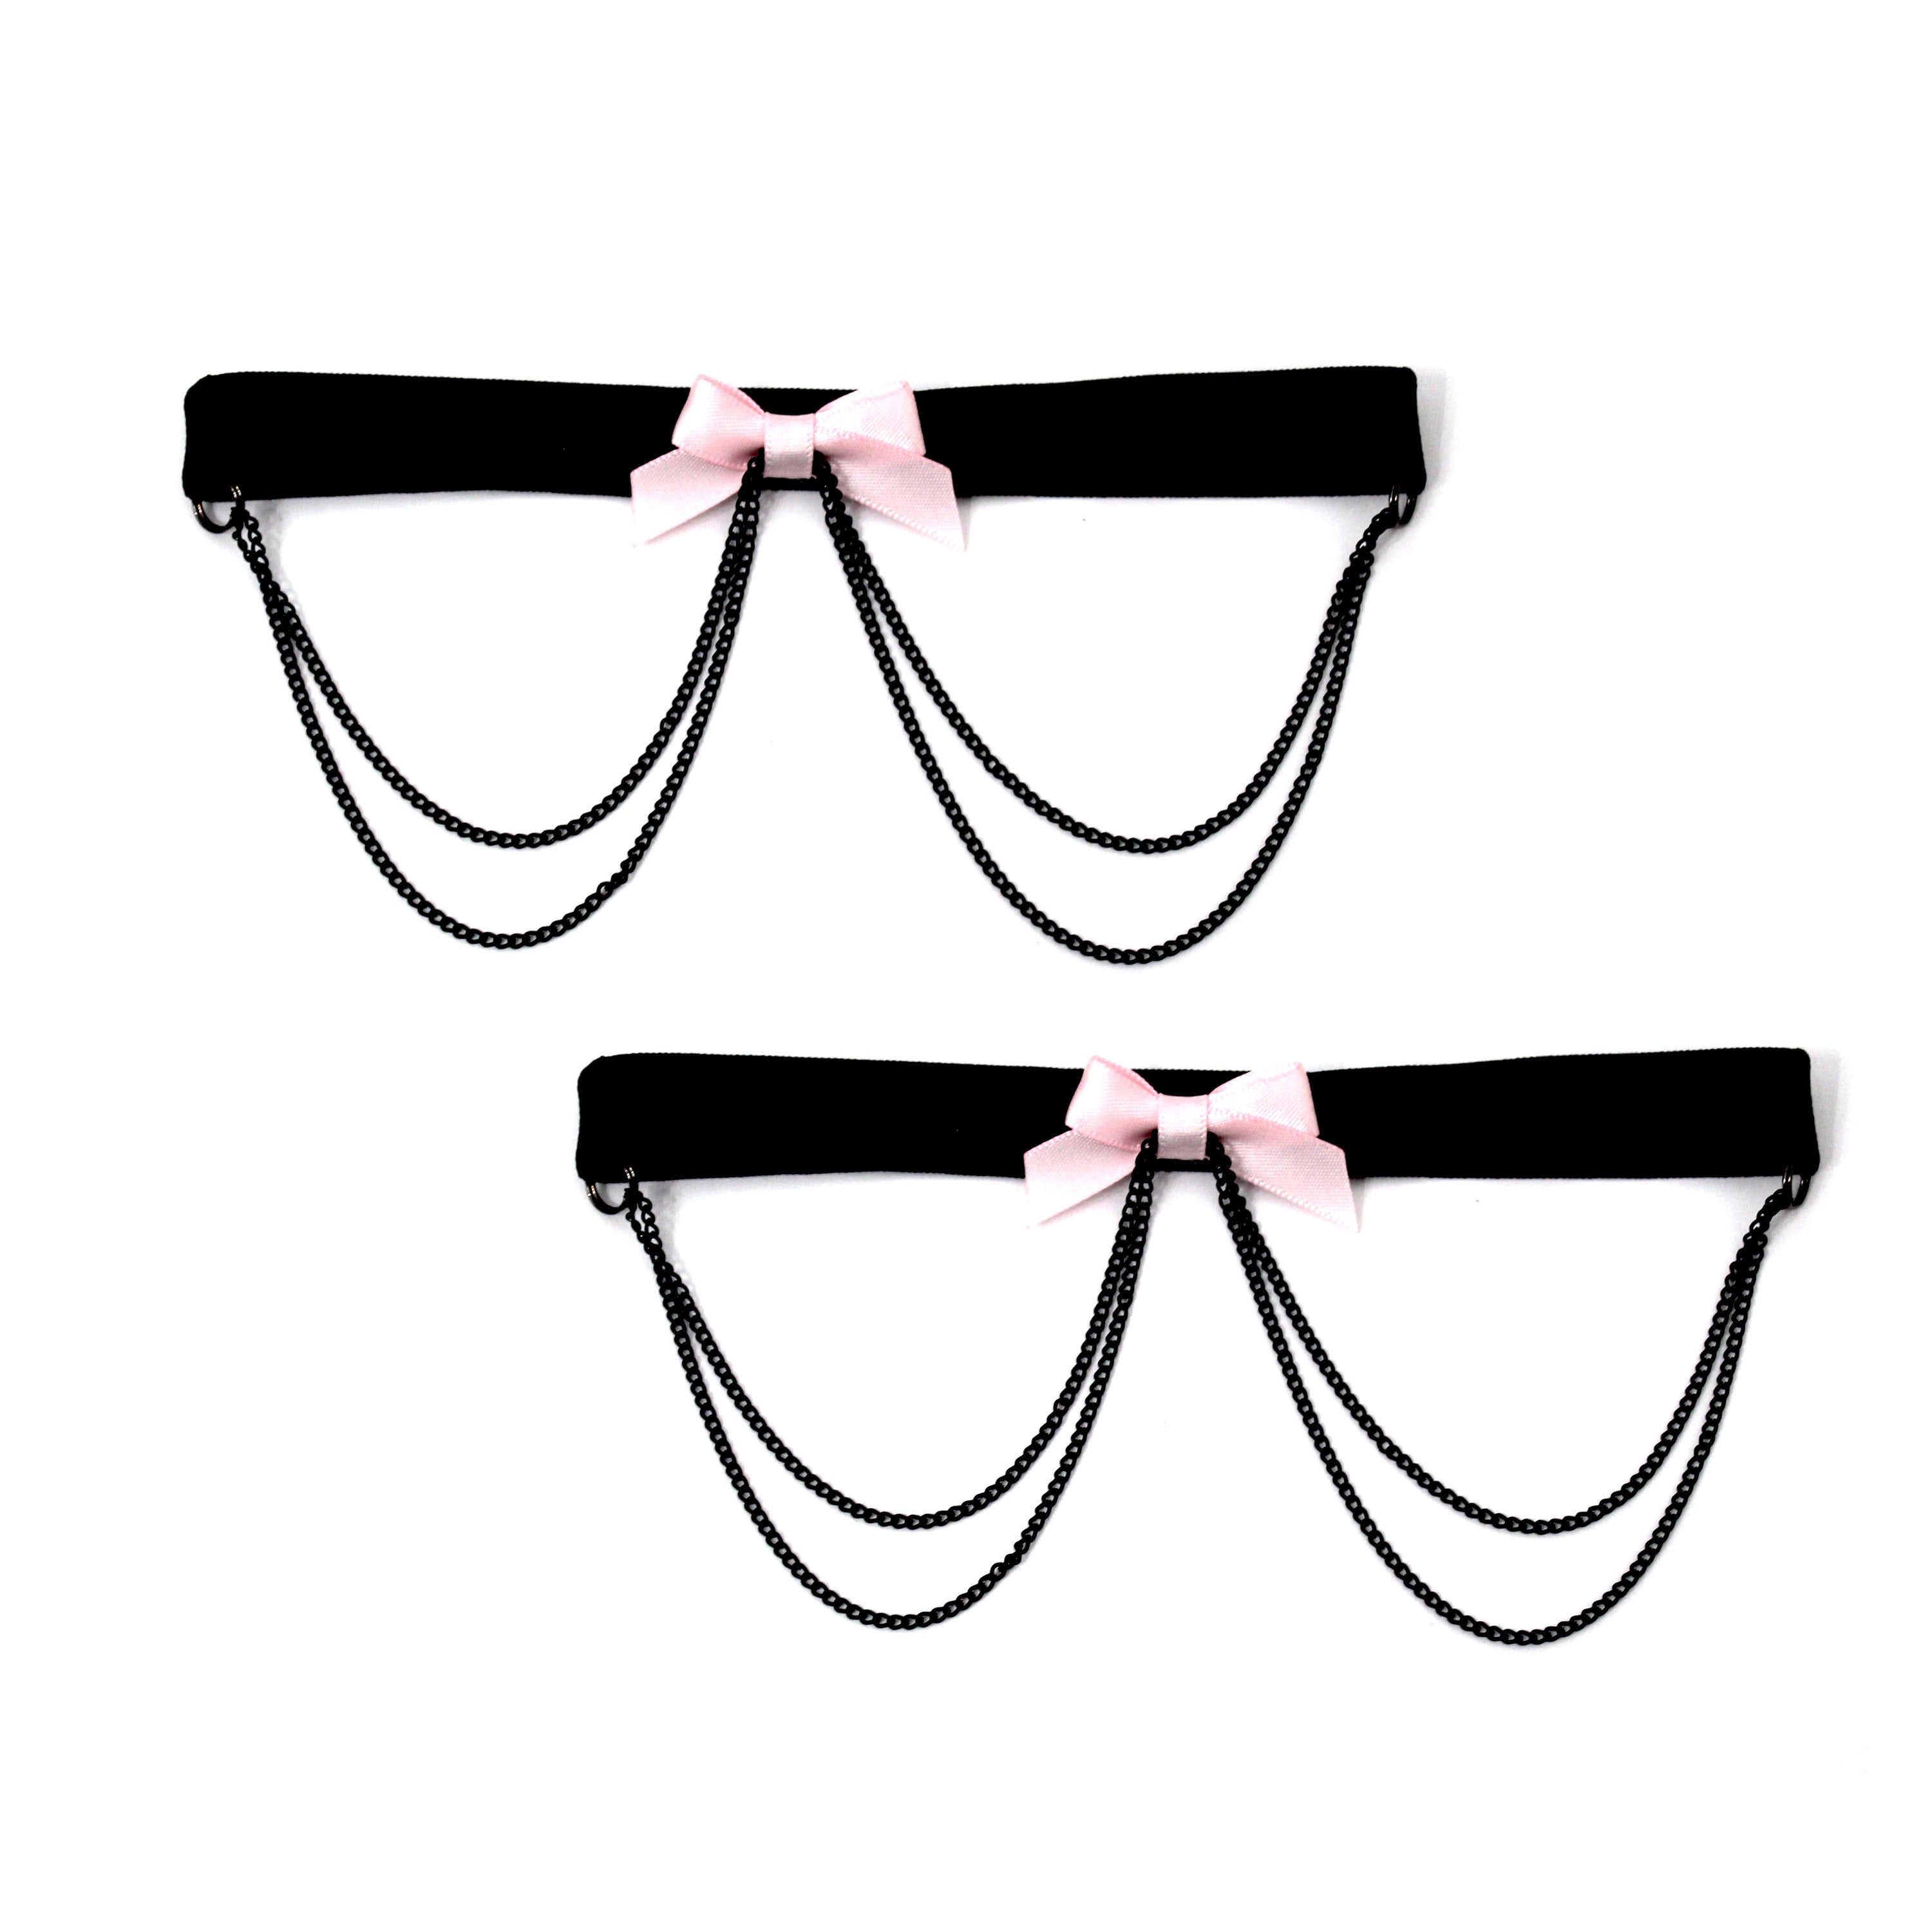 Vice Pink Bow Leg Garters with Black Chain